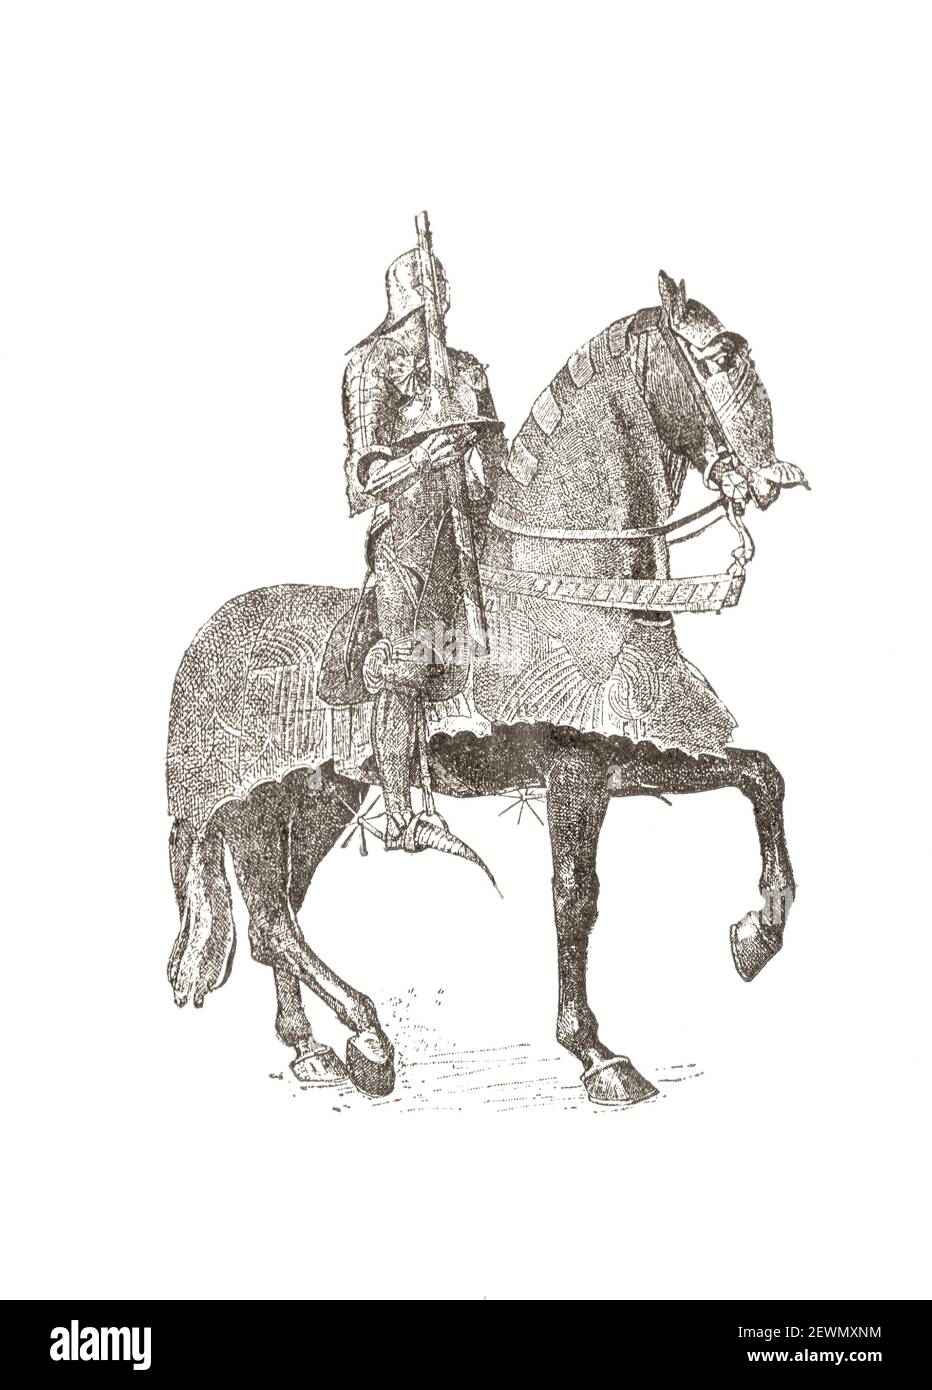 French armor of the gendarme of the times of Louis 14th. Medieval engraving. Stock Photo